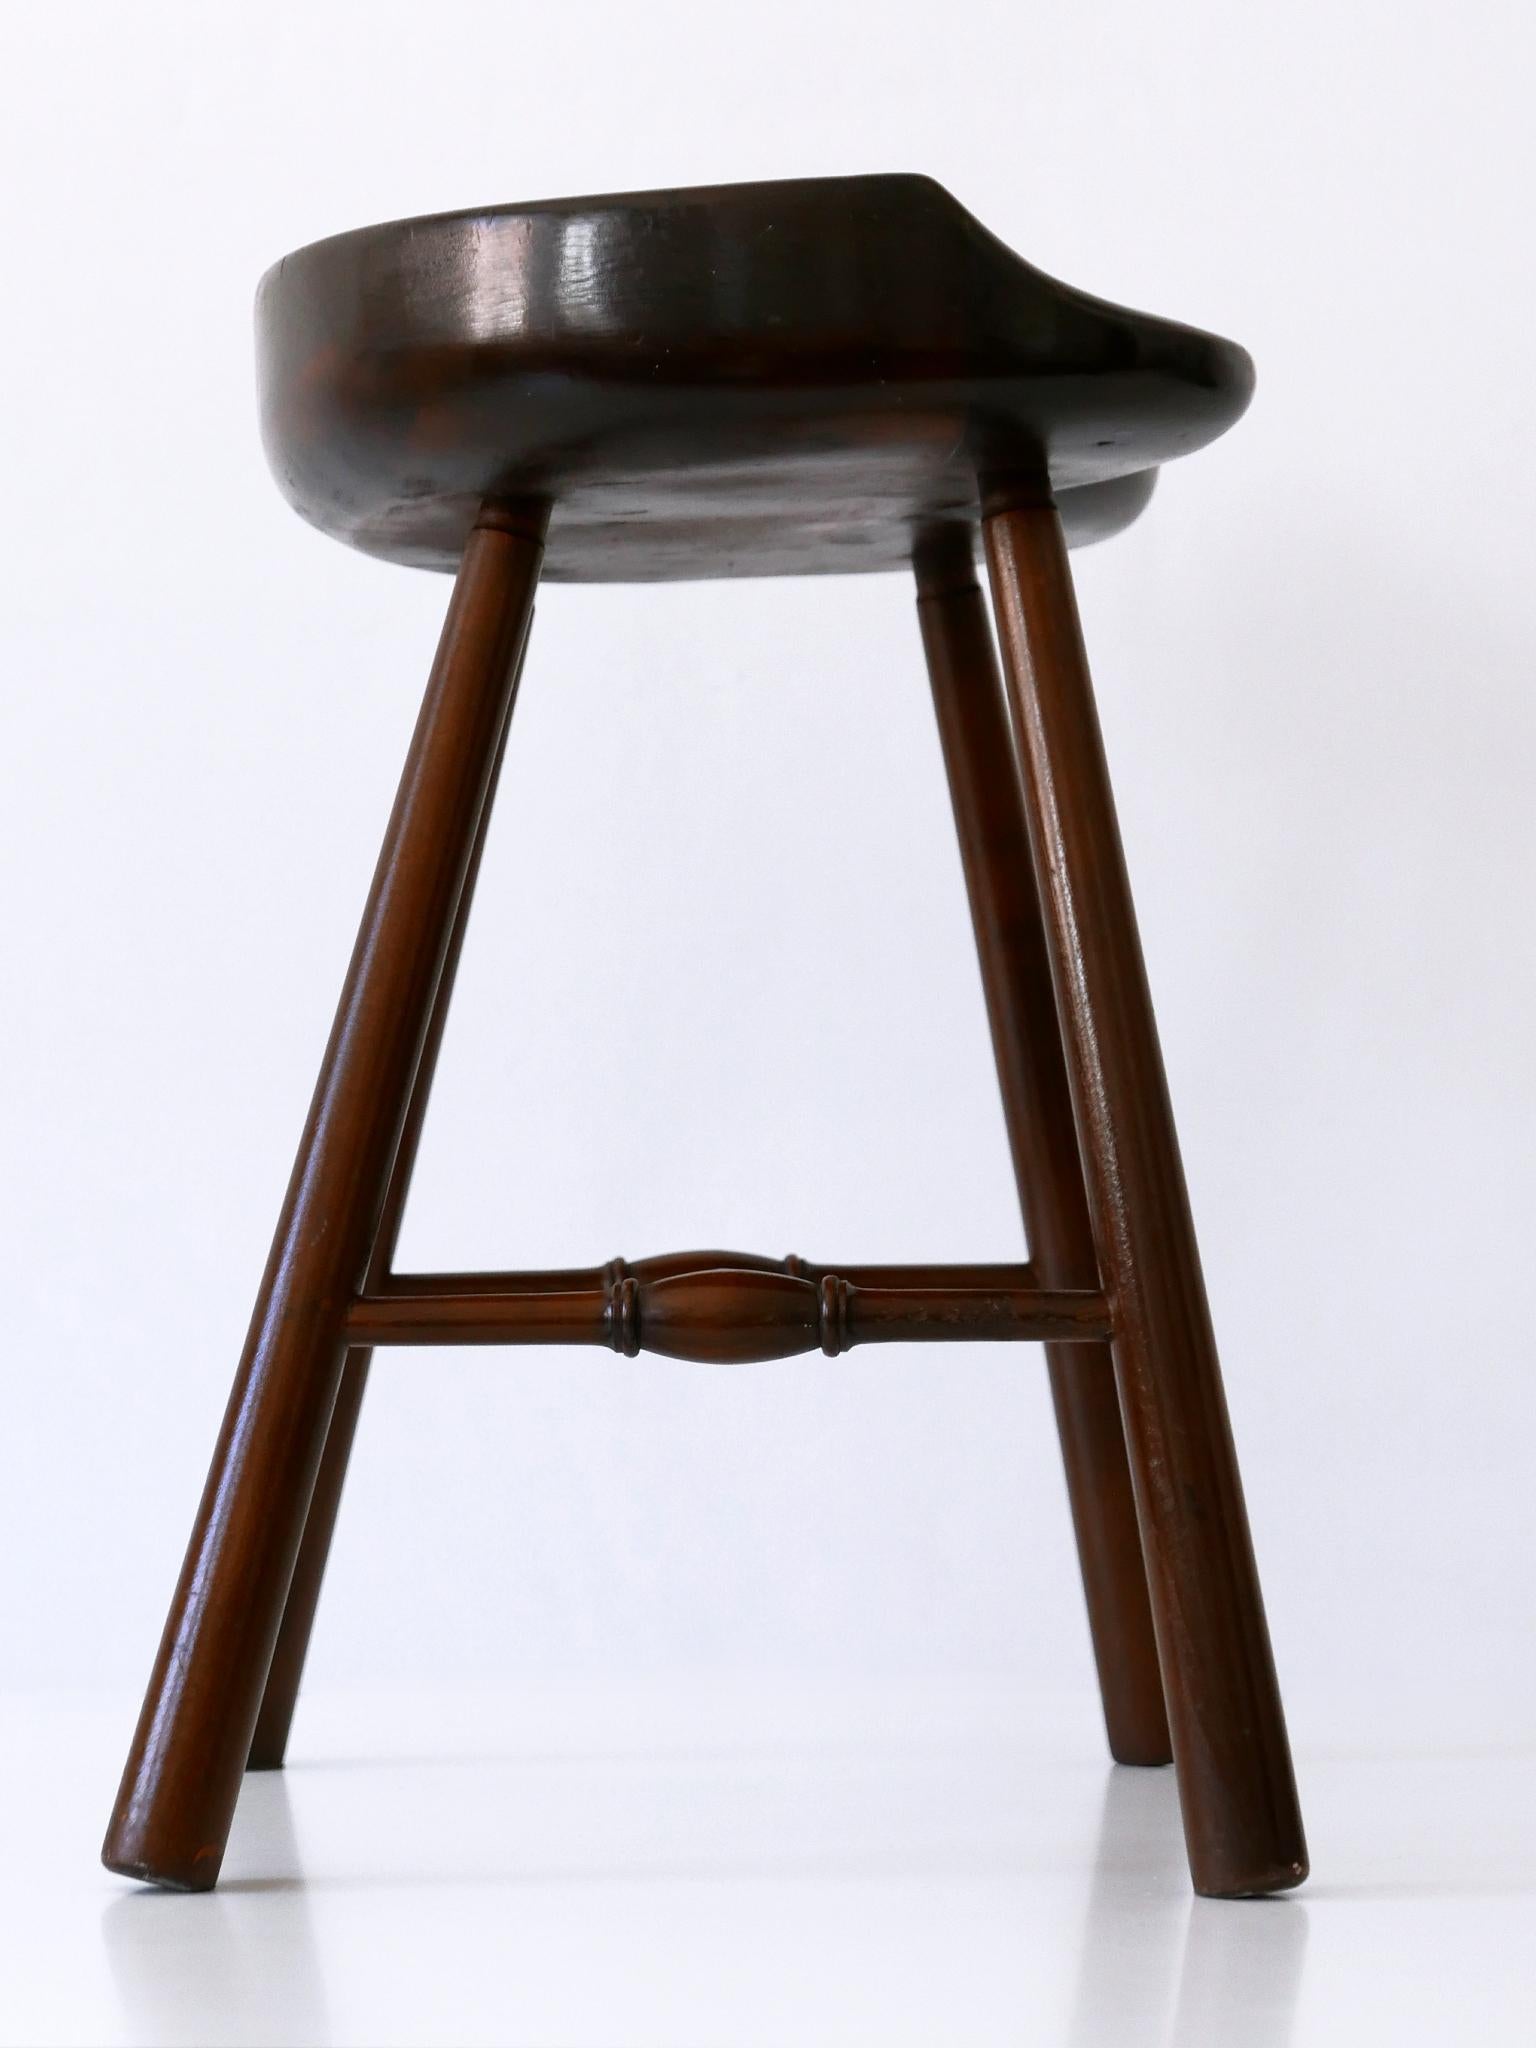 Sculptural Mid-Century Modern Solid Wood Stool Germany 1950s For Sale 7